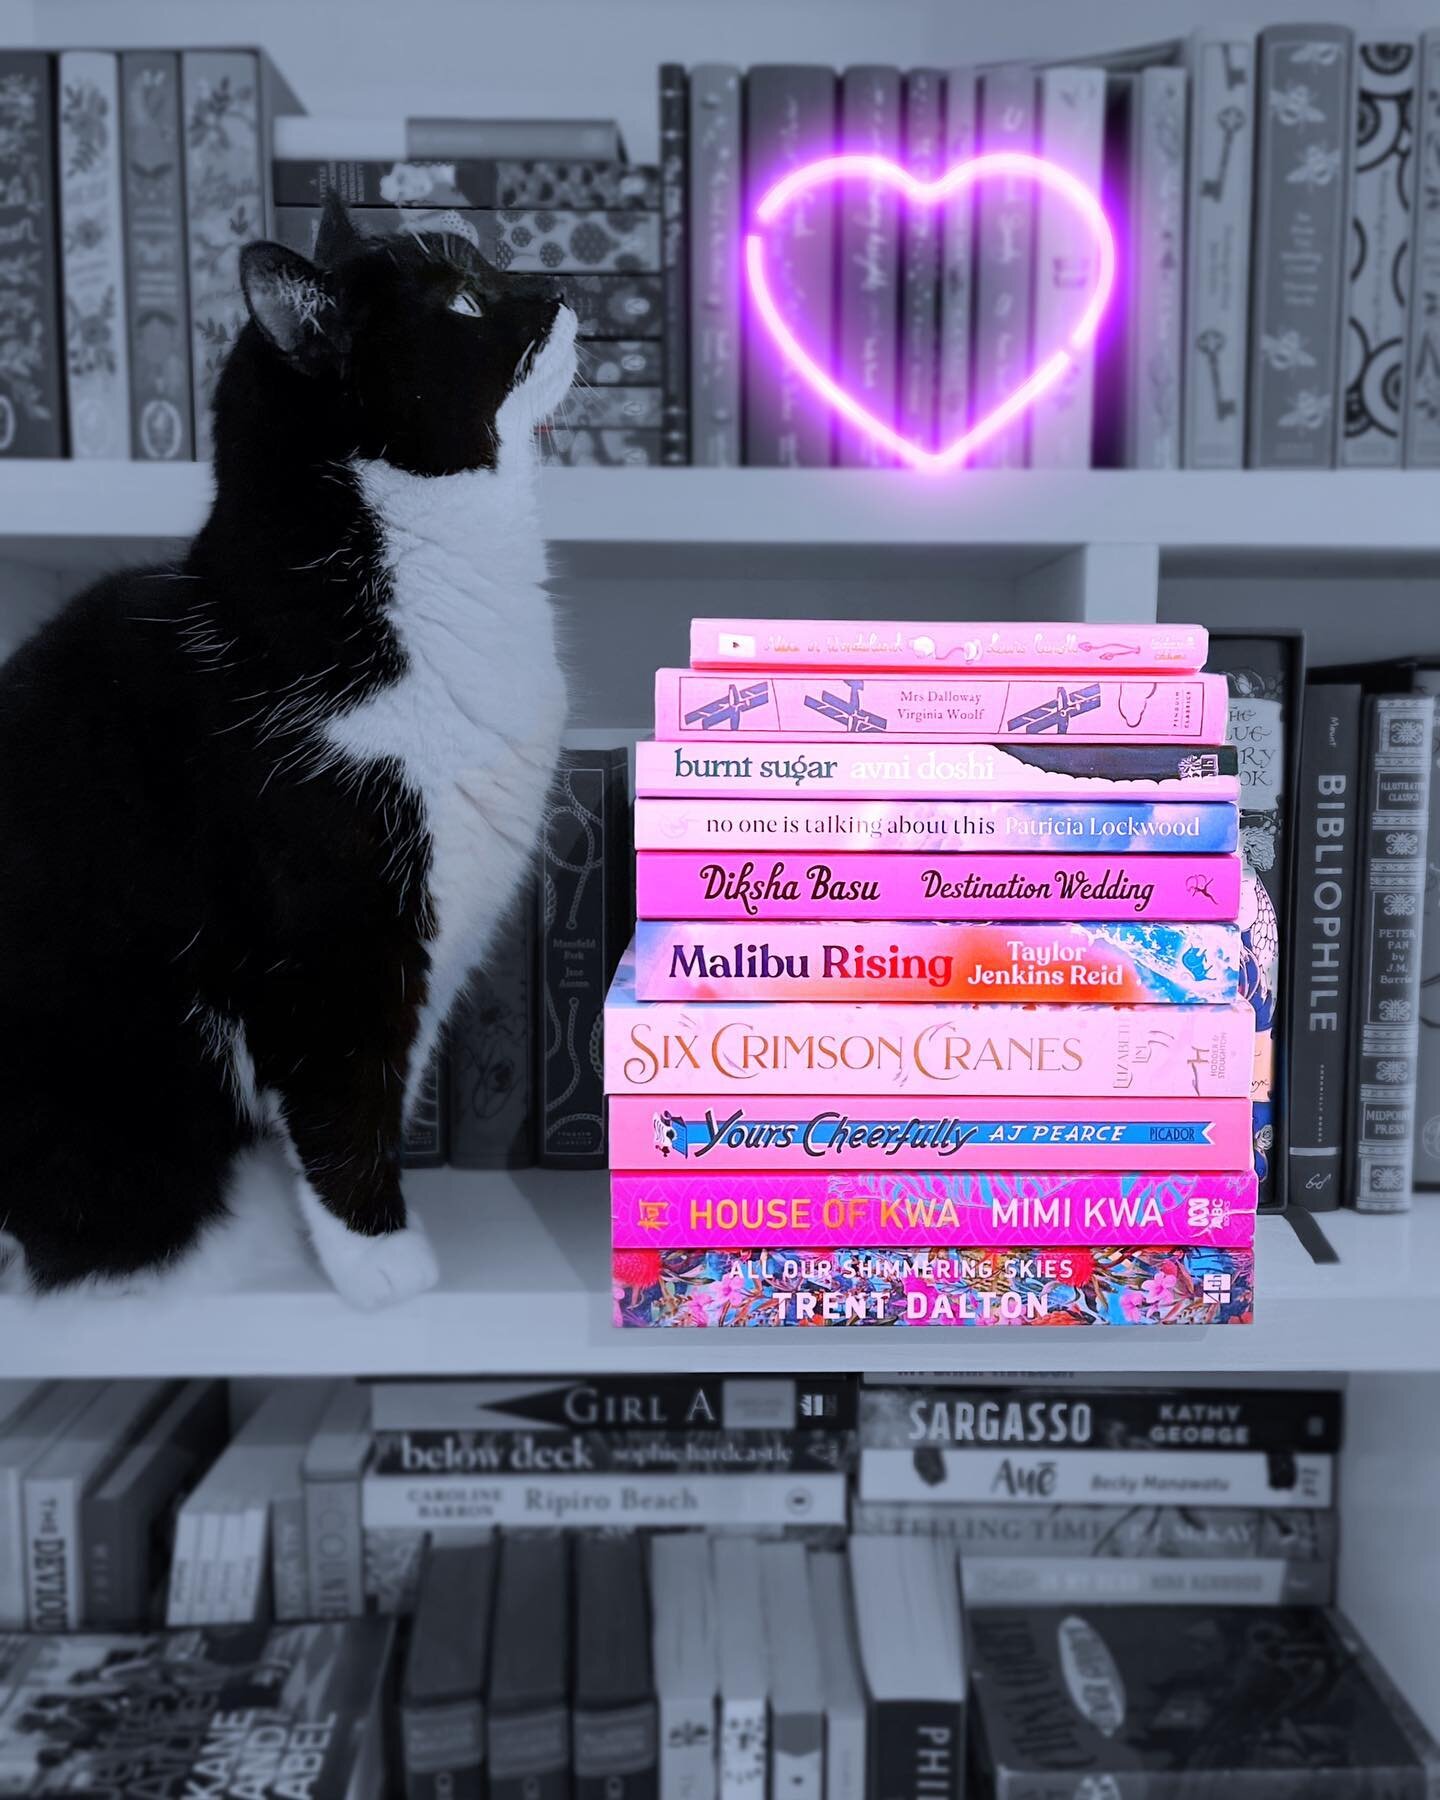 #PinkStackforAfghanWomen

Thank you @Kate.the.book.nerd for tagging me in this #stackforacause from @bibliolucinda

For every pink stack or pink #bookish post posted until September 1st using the hashtag above, Lucinda will donate $1 to @womenforafgh